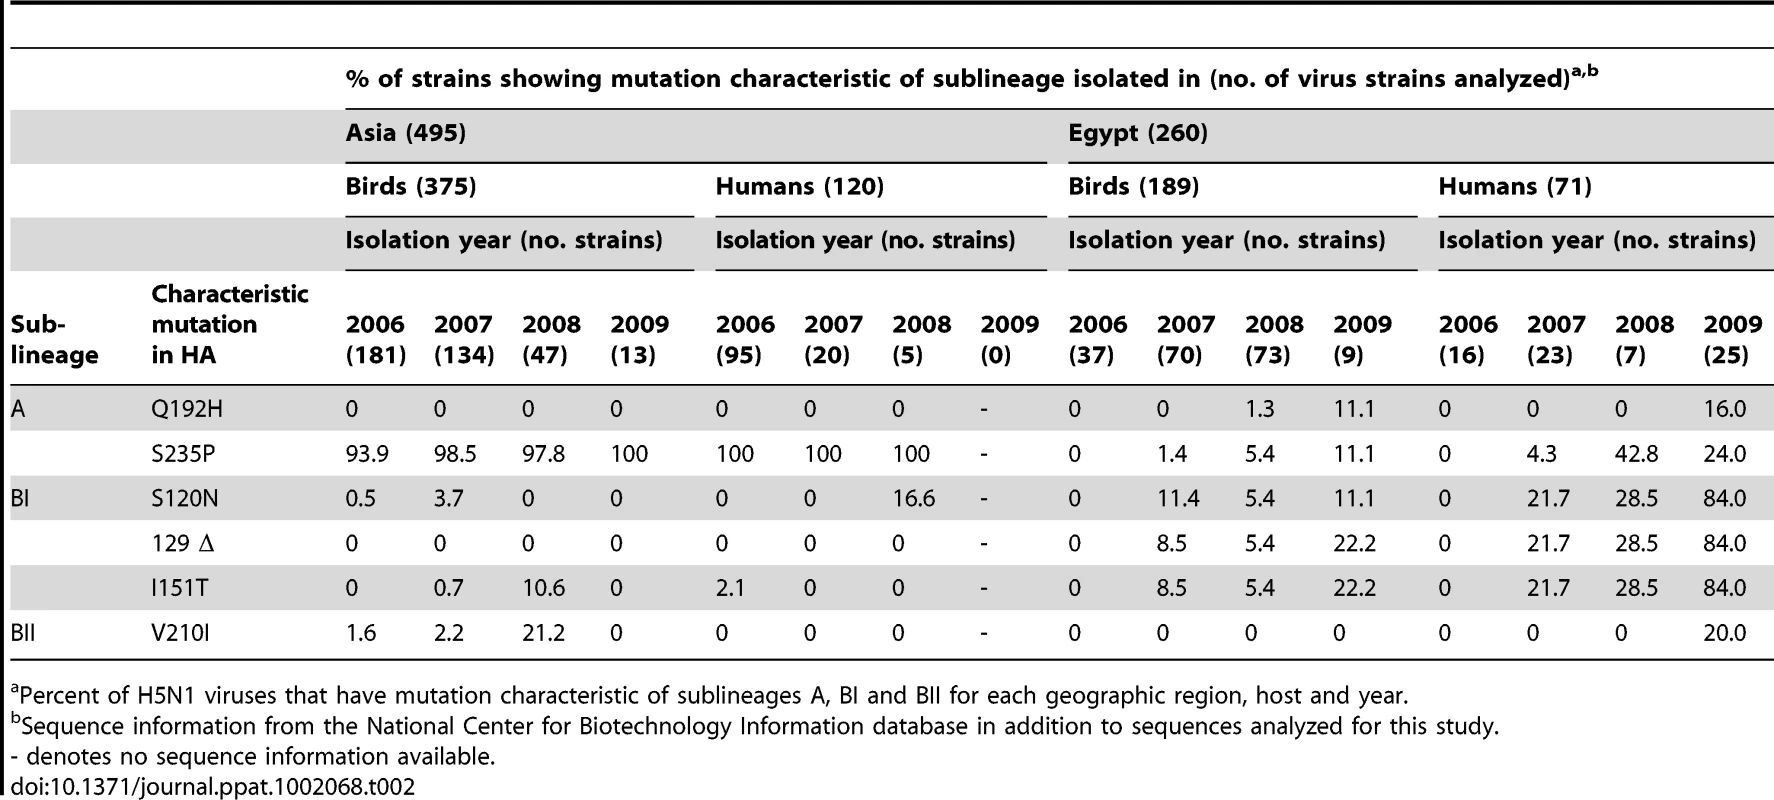 Prevalence of HA mutations characteristic of H5 sublineages A, BI and BII viruses in virus isolates from Egypt and Asia.